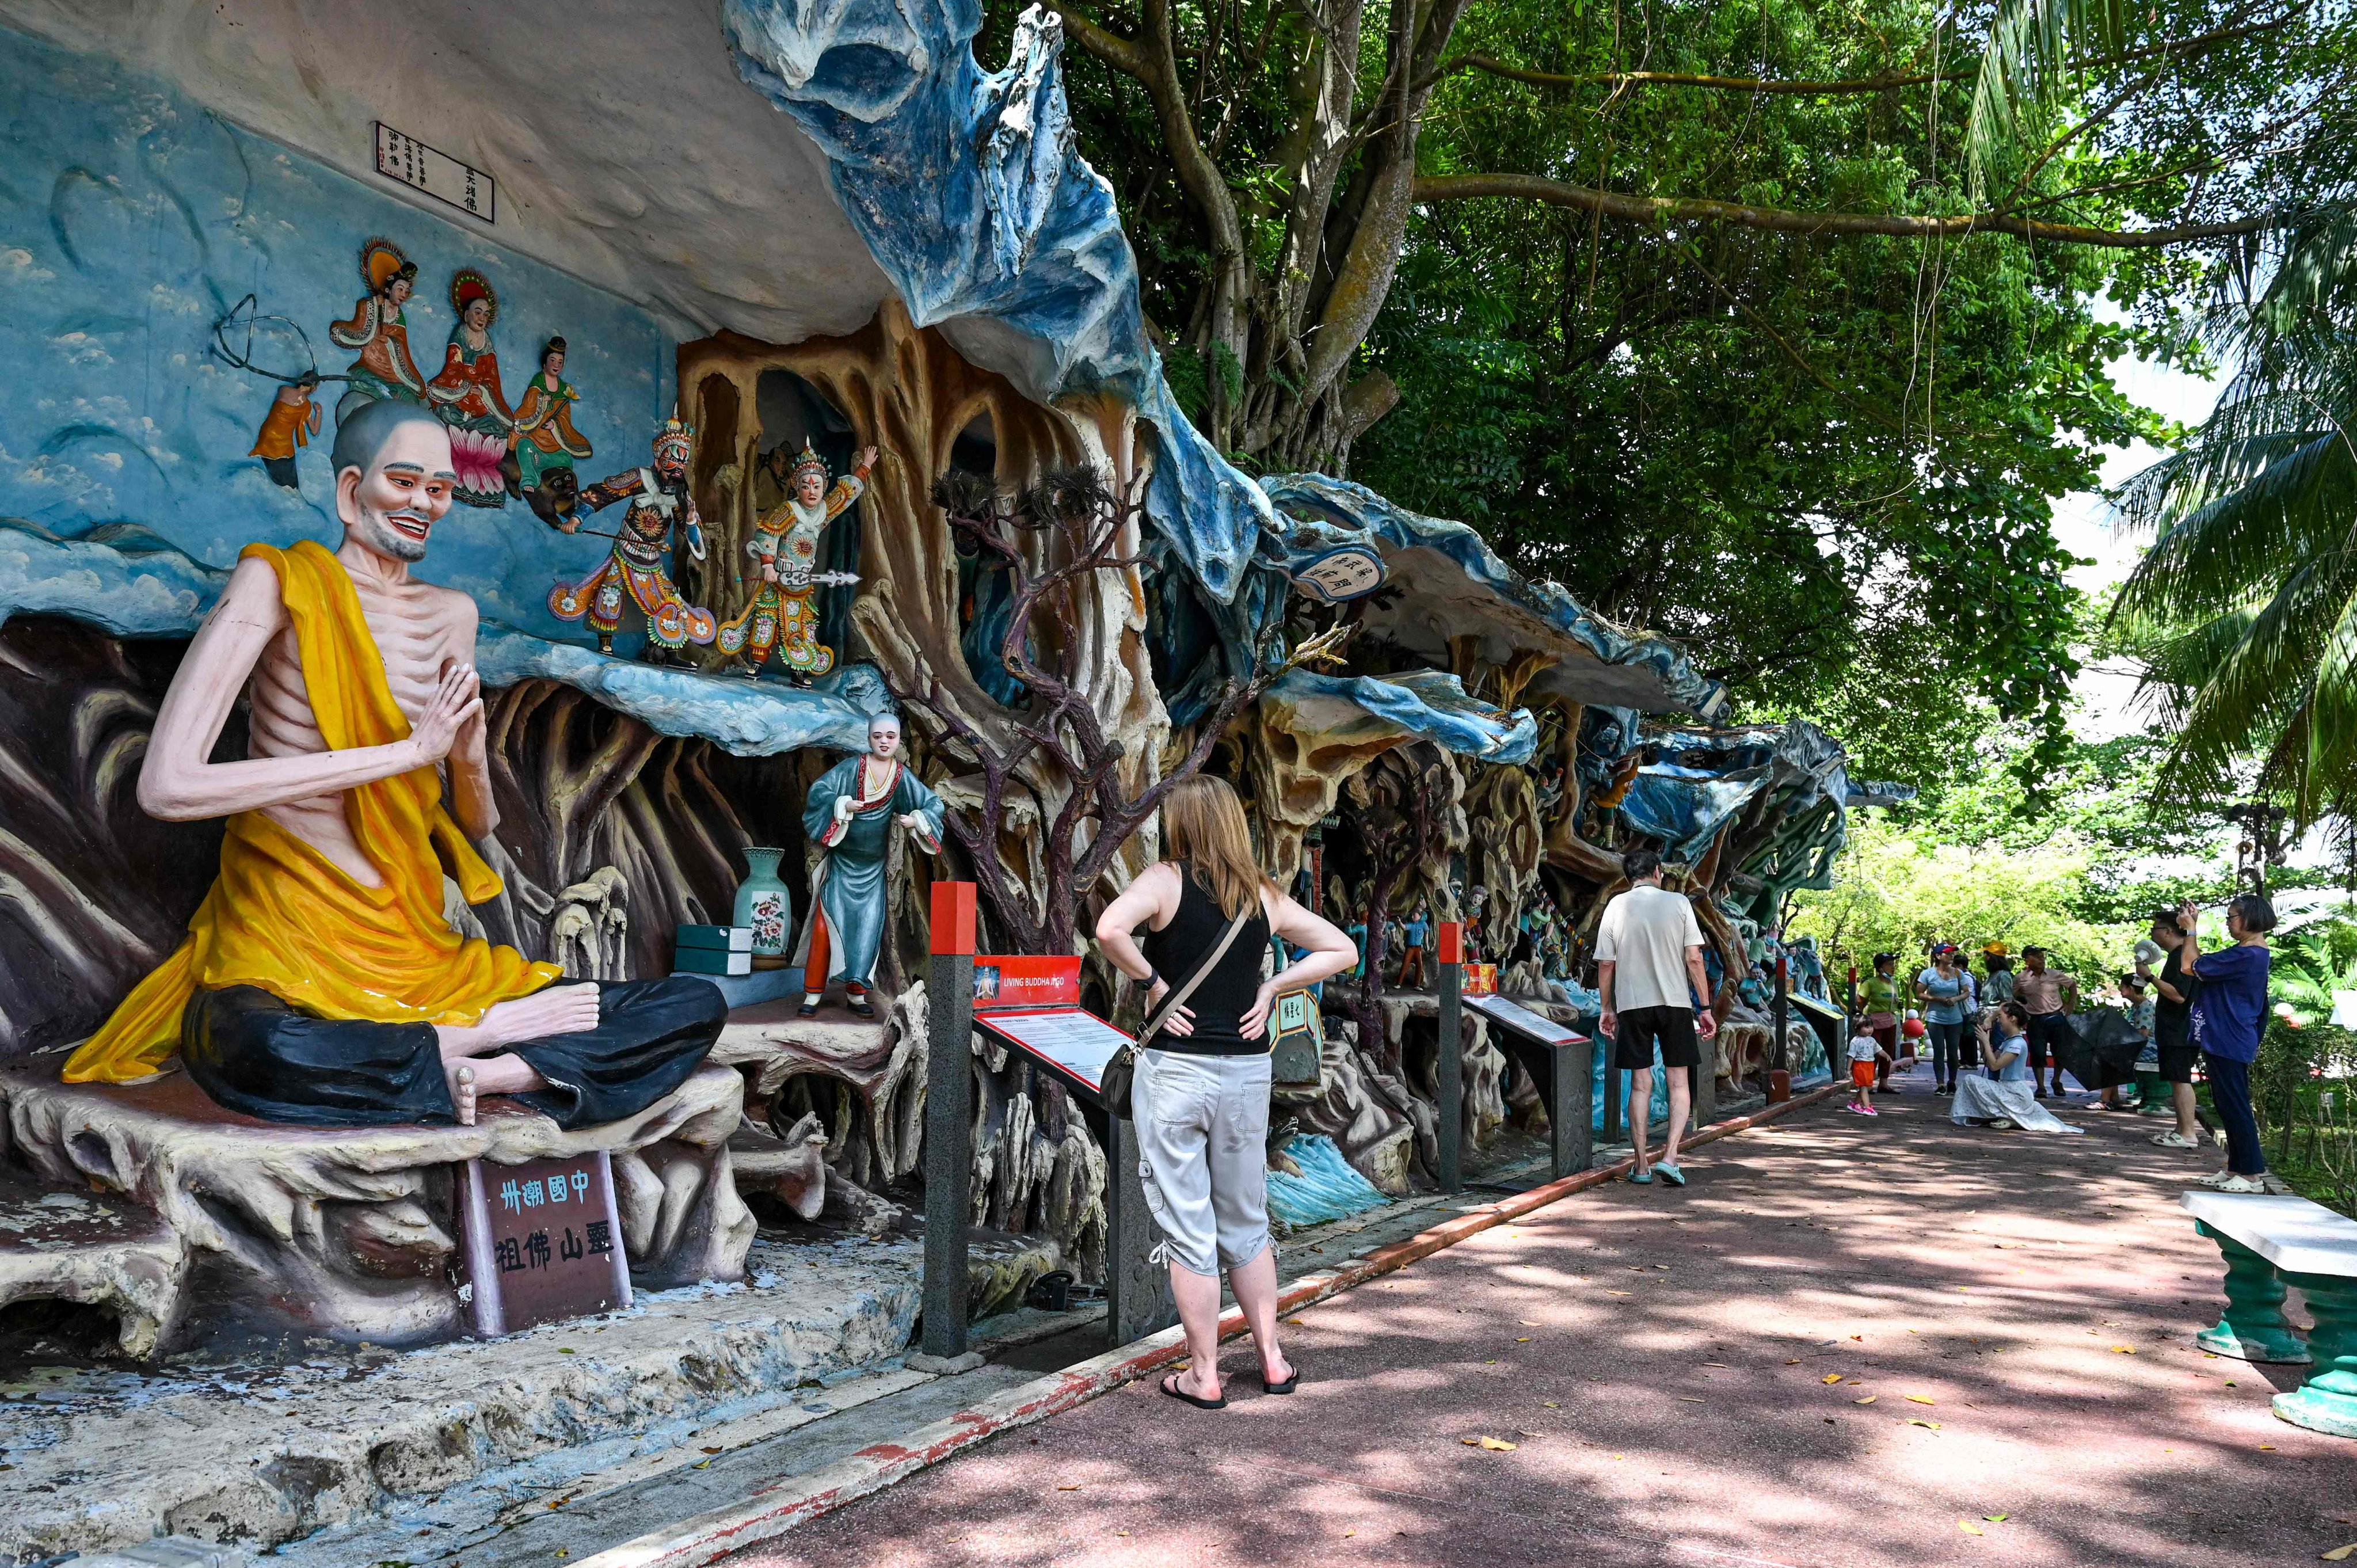 Visitors walking past statues at Haw Par Villa, an Asian cultural park that features Chinese folklore, legend and mythology in Singapore. Photo: AFP